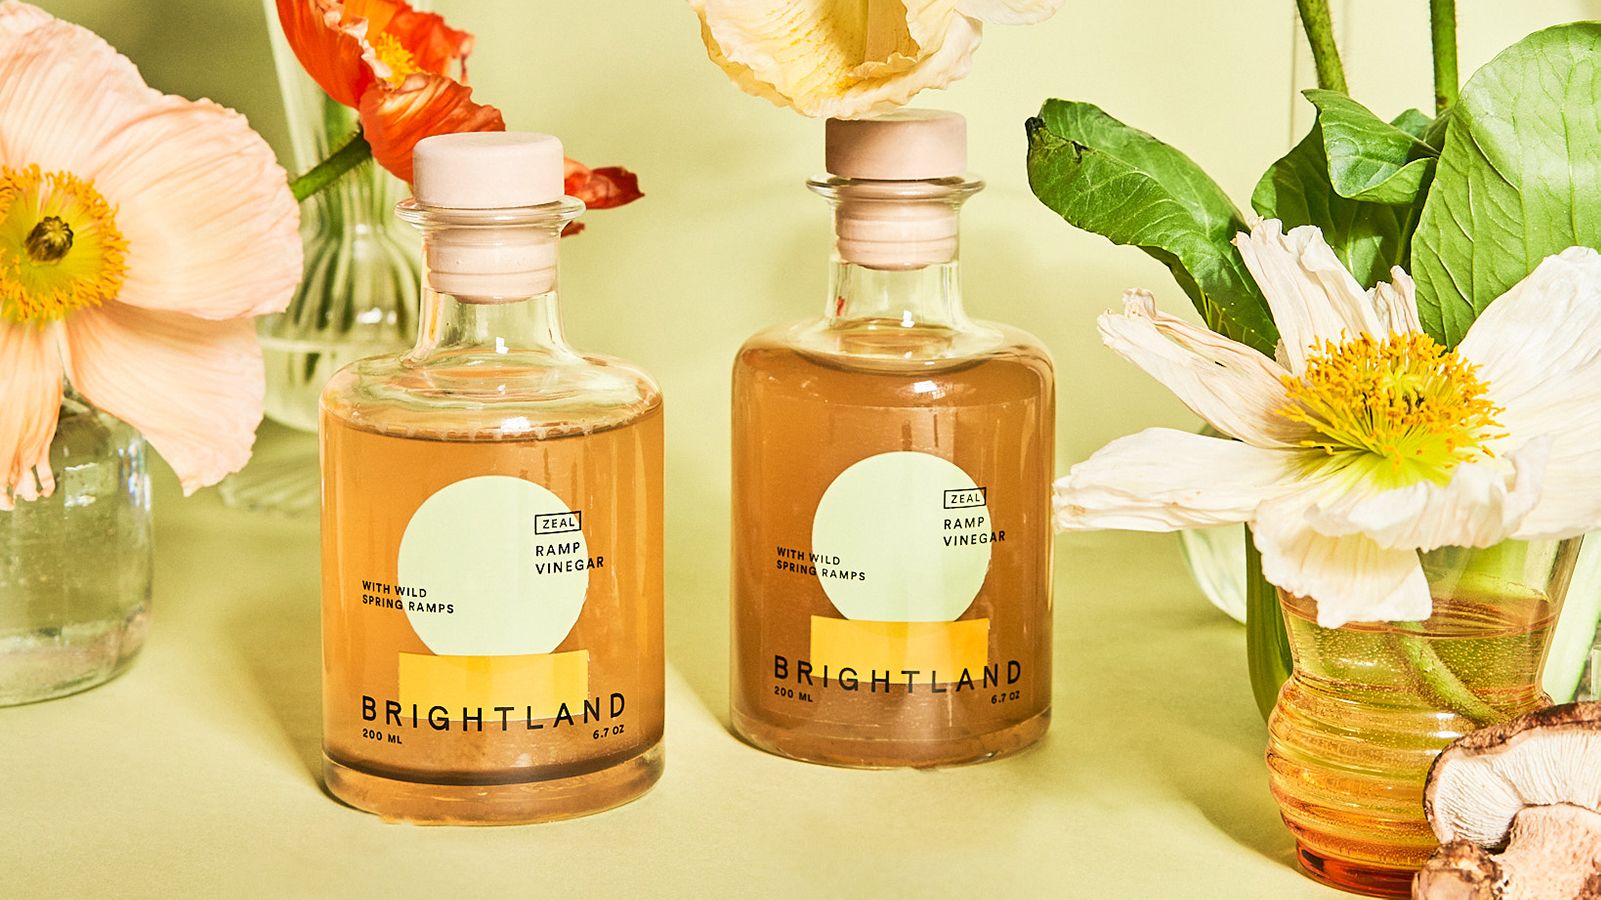 Brightland debuts new limited-edition ramp vinegar just in time for spring salads | CNN Underscored